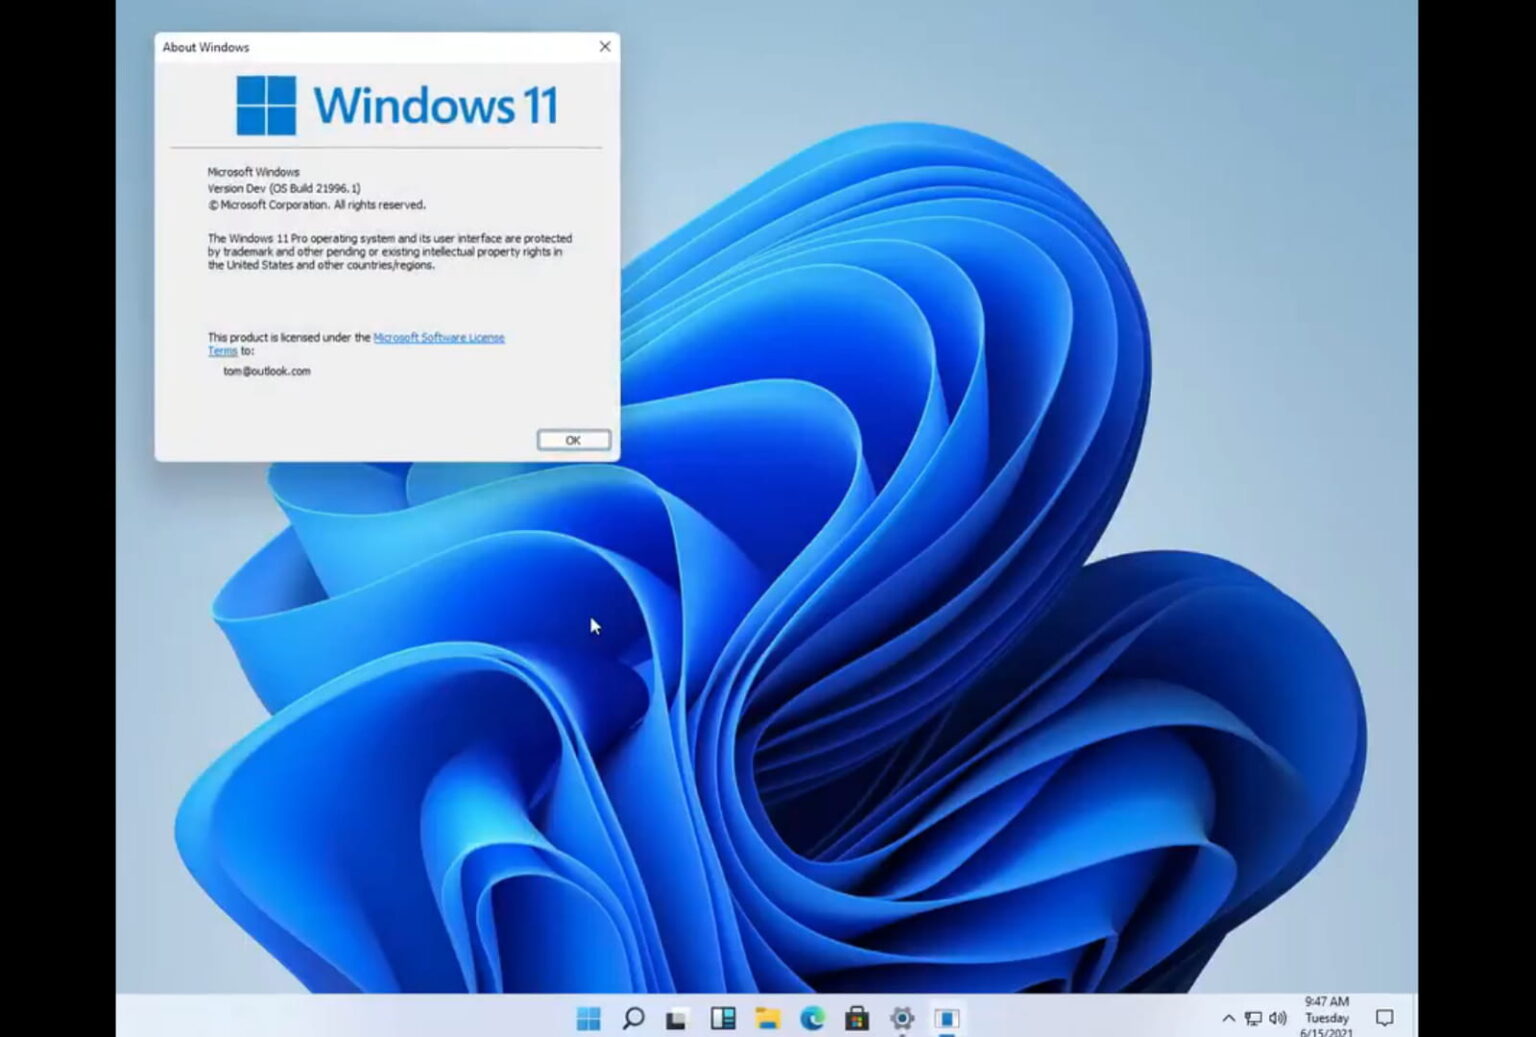 free download windows 11 iso